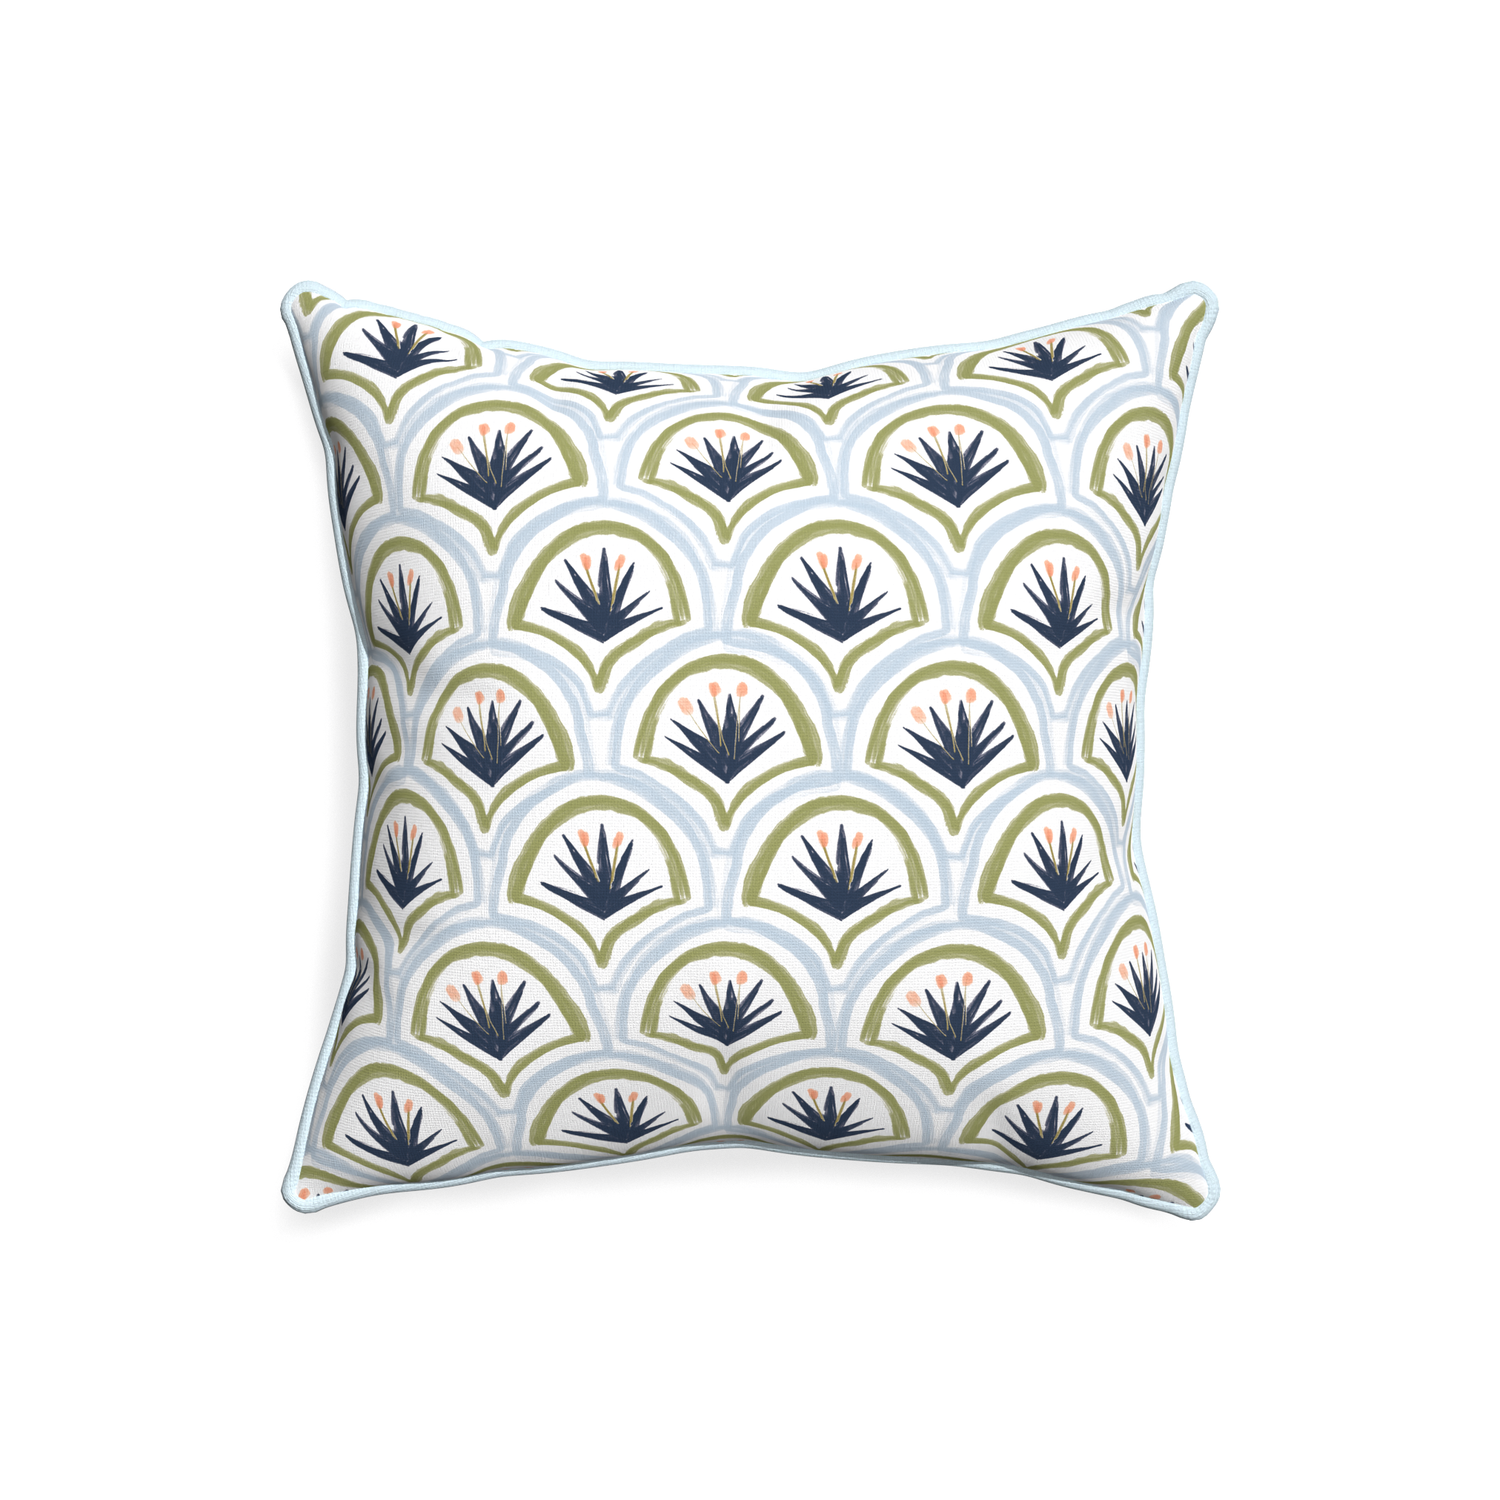 20-square thatcher midnight custom art deco palm patternpillow with powder piping on white background